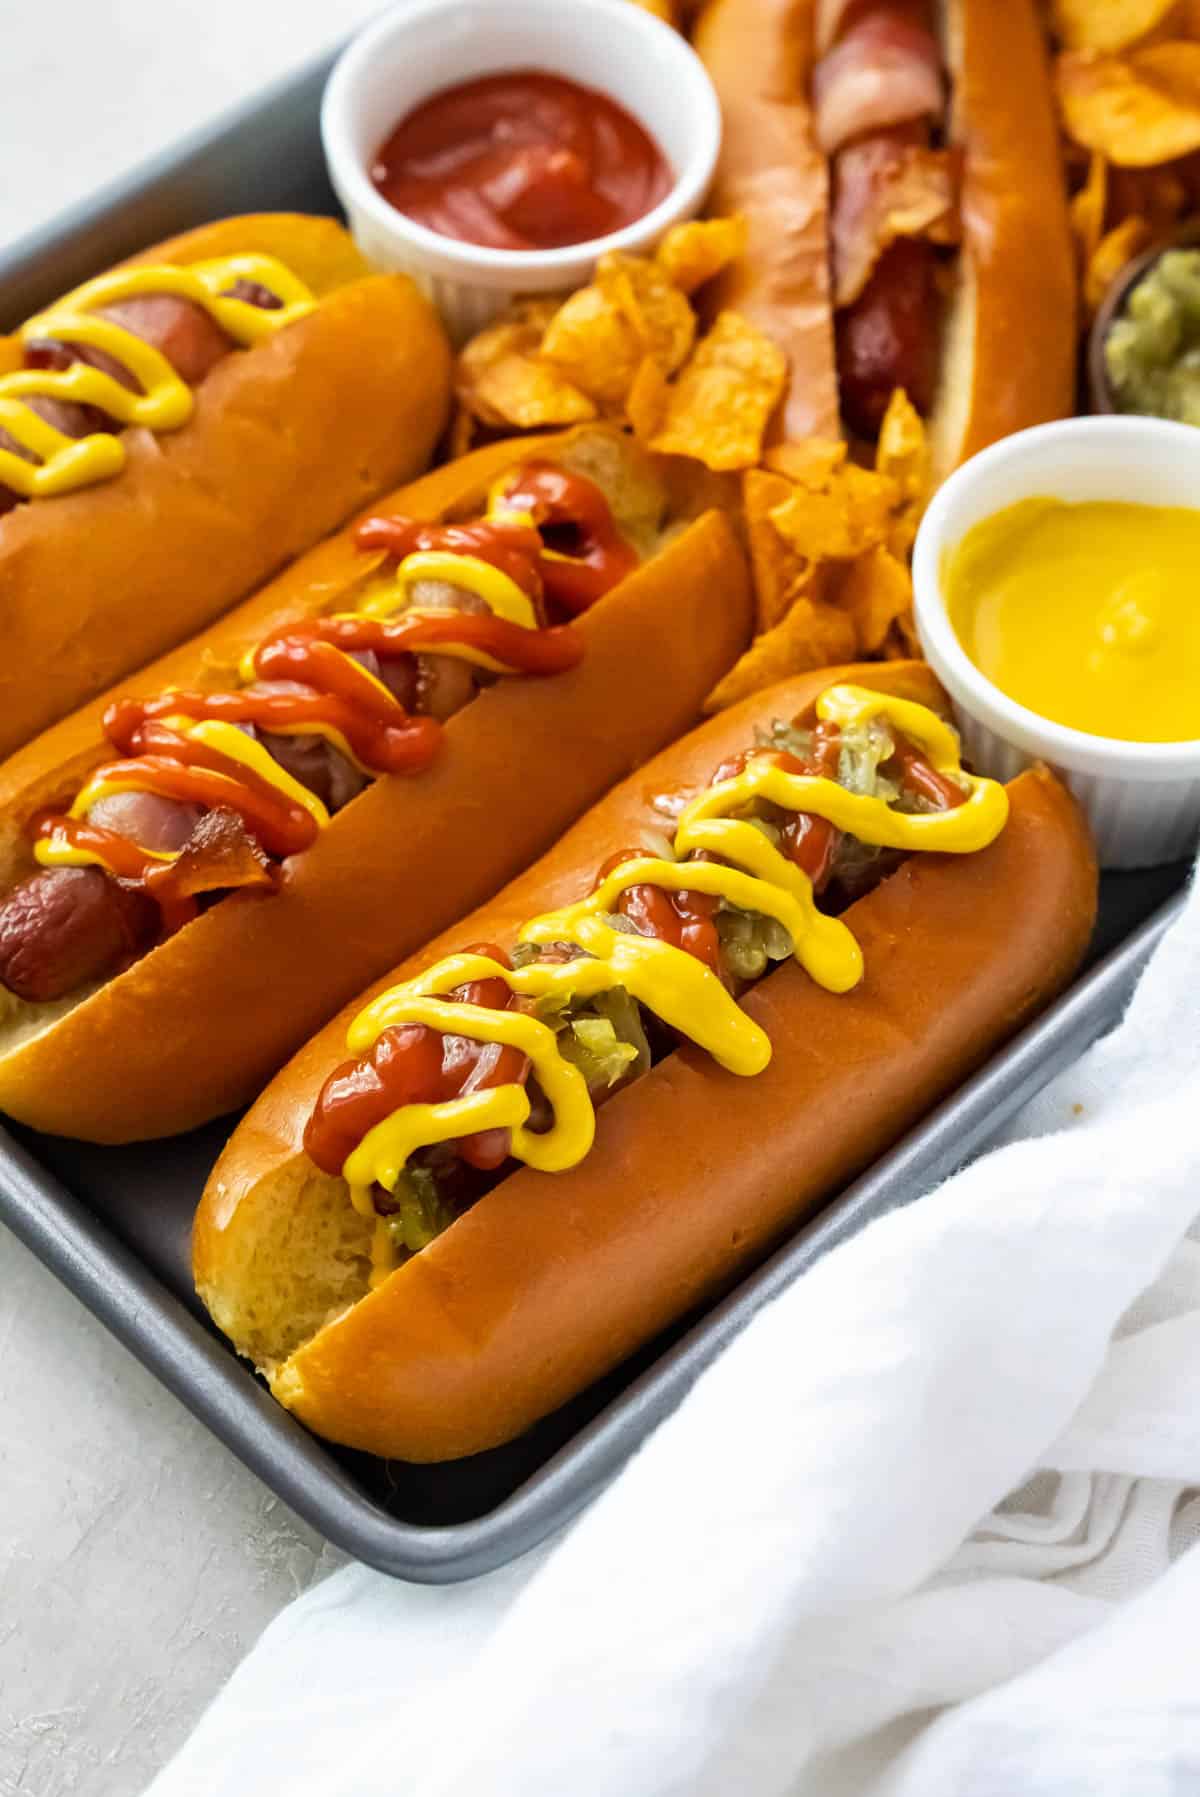 Hot dogs topped with all the fixings.